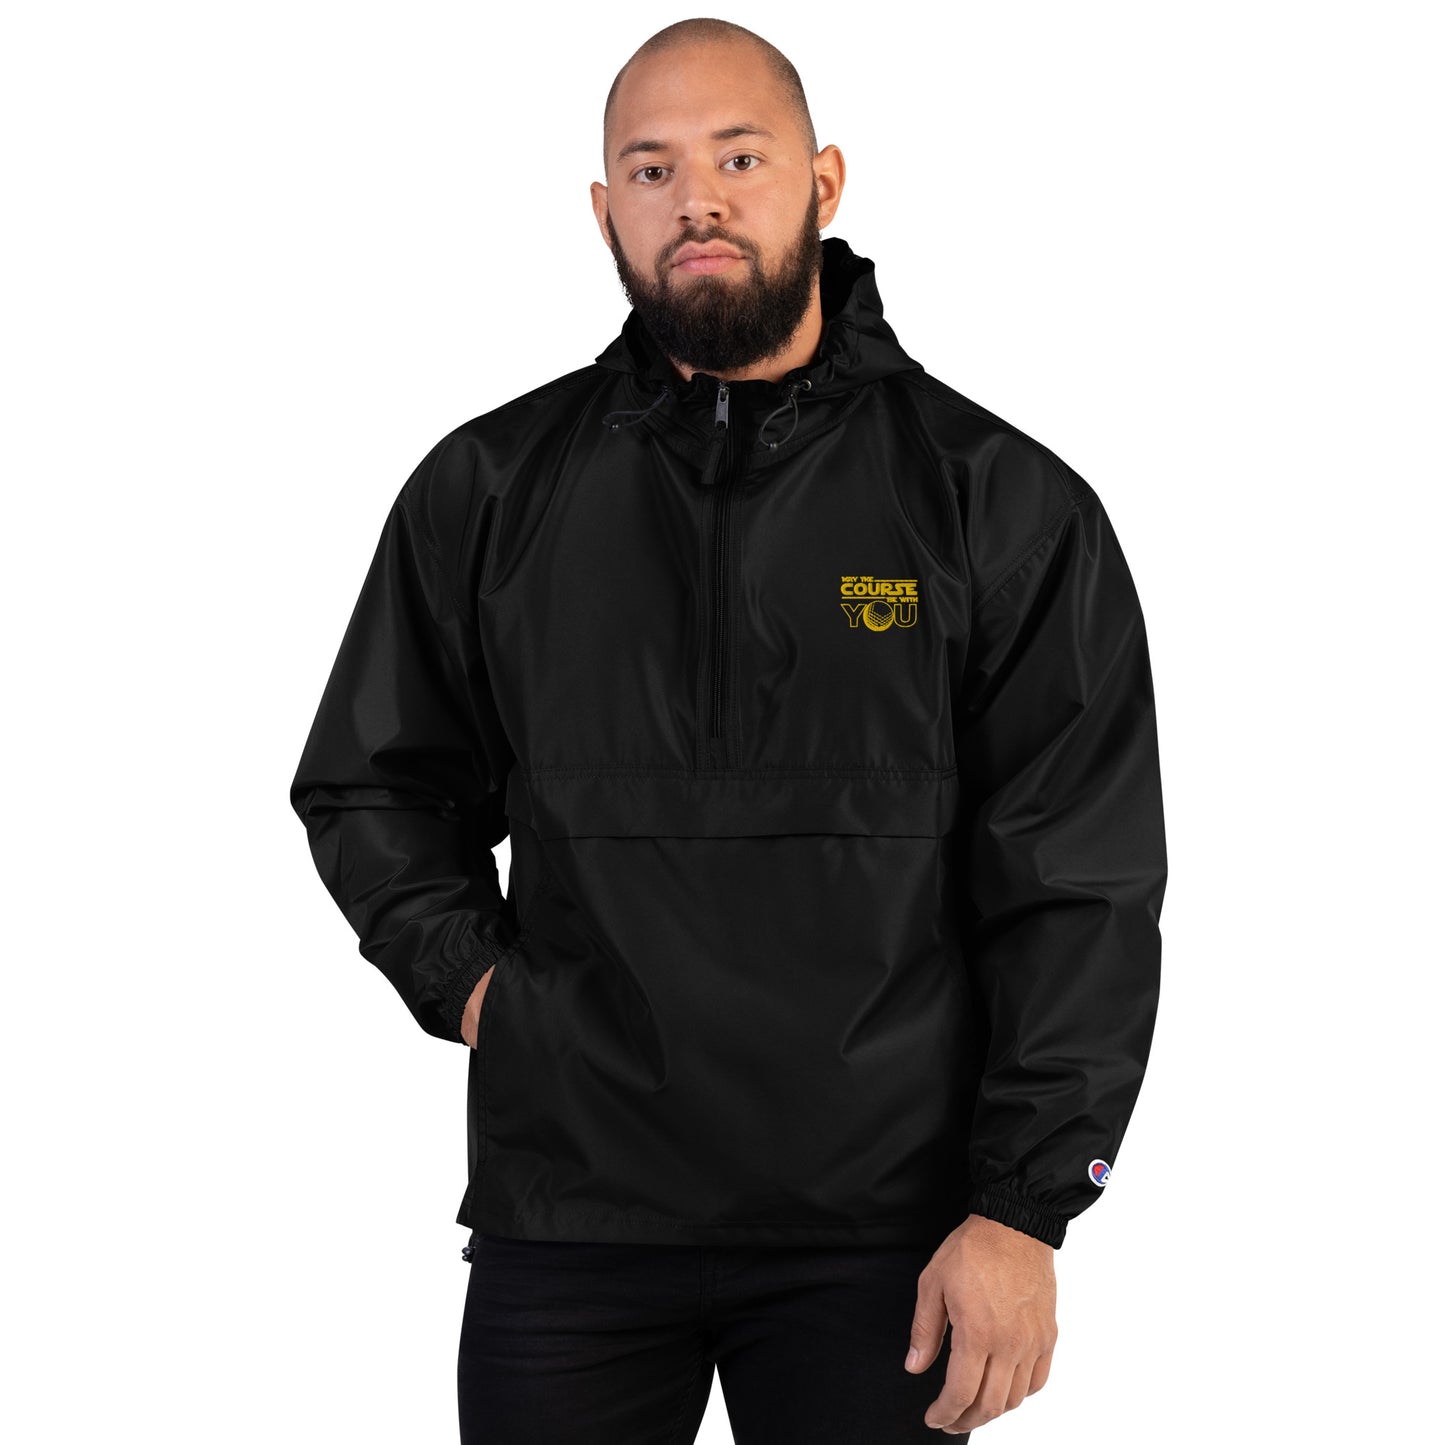 May The Course Be With You Champion Packable Rain Jacket (Yellow Lettering)